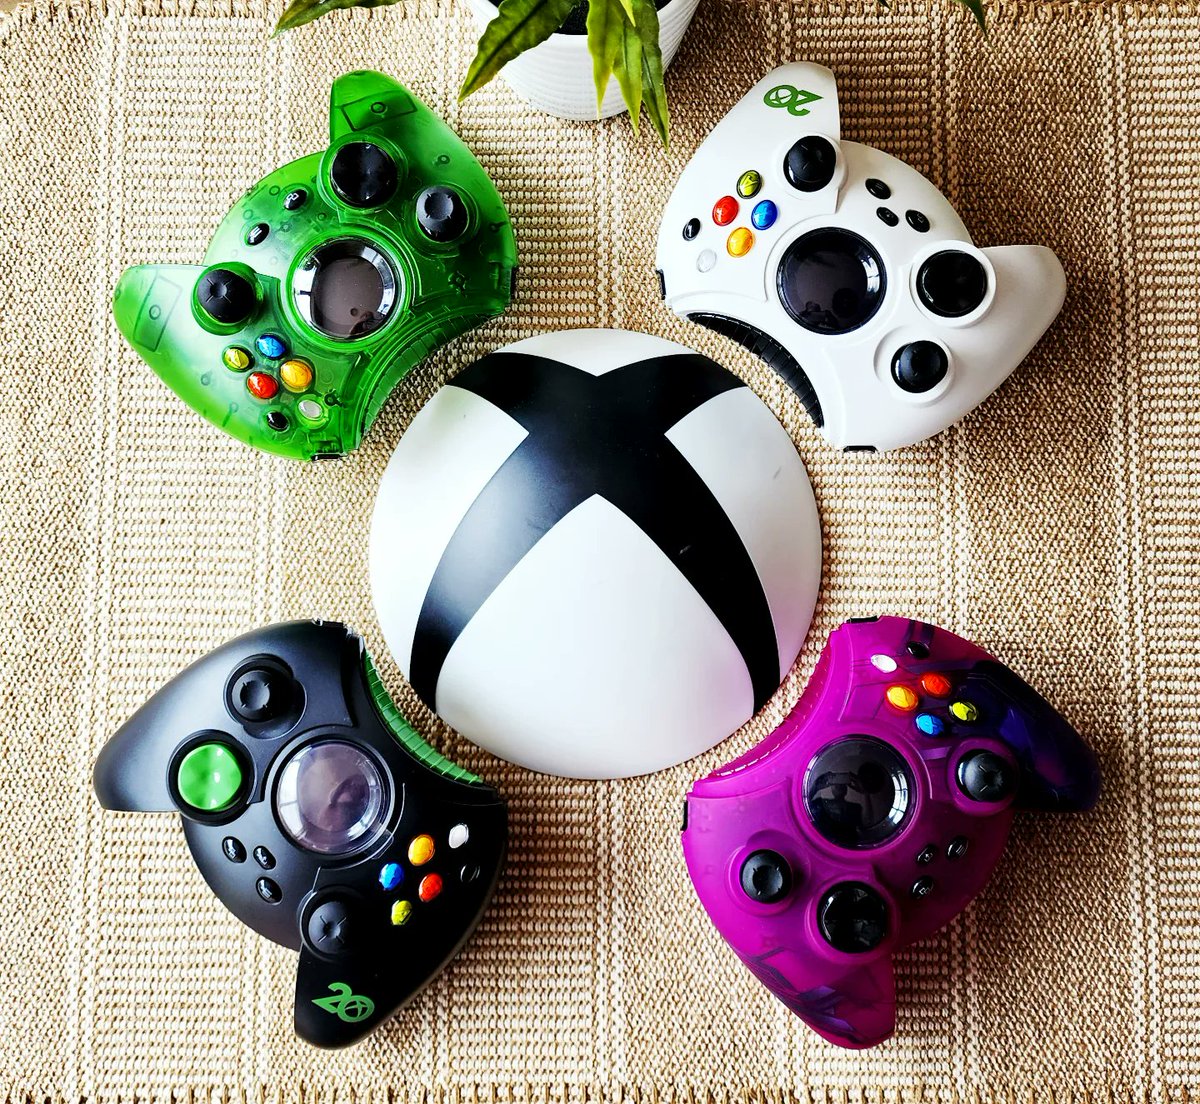 Choose your Duke 😁

Which one are you picking up for your 4 player Halo CE Splitscrneen night?

@XboxANZ @Xbox #Originalxbox #controller #XboxShare #XboxOne #xbox20